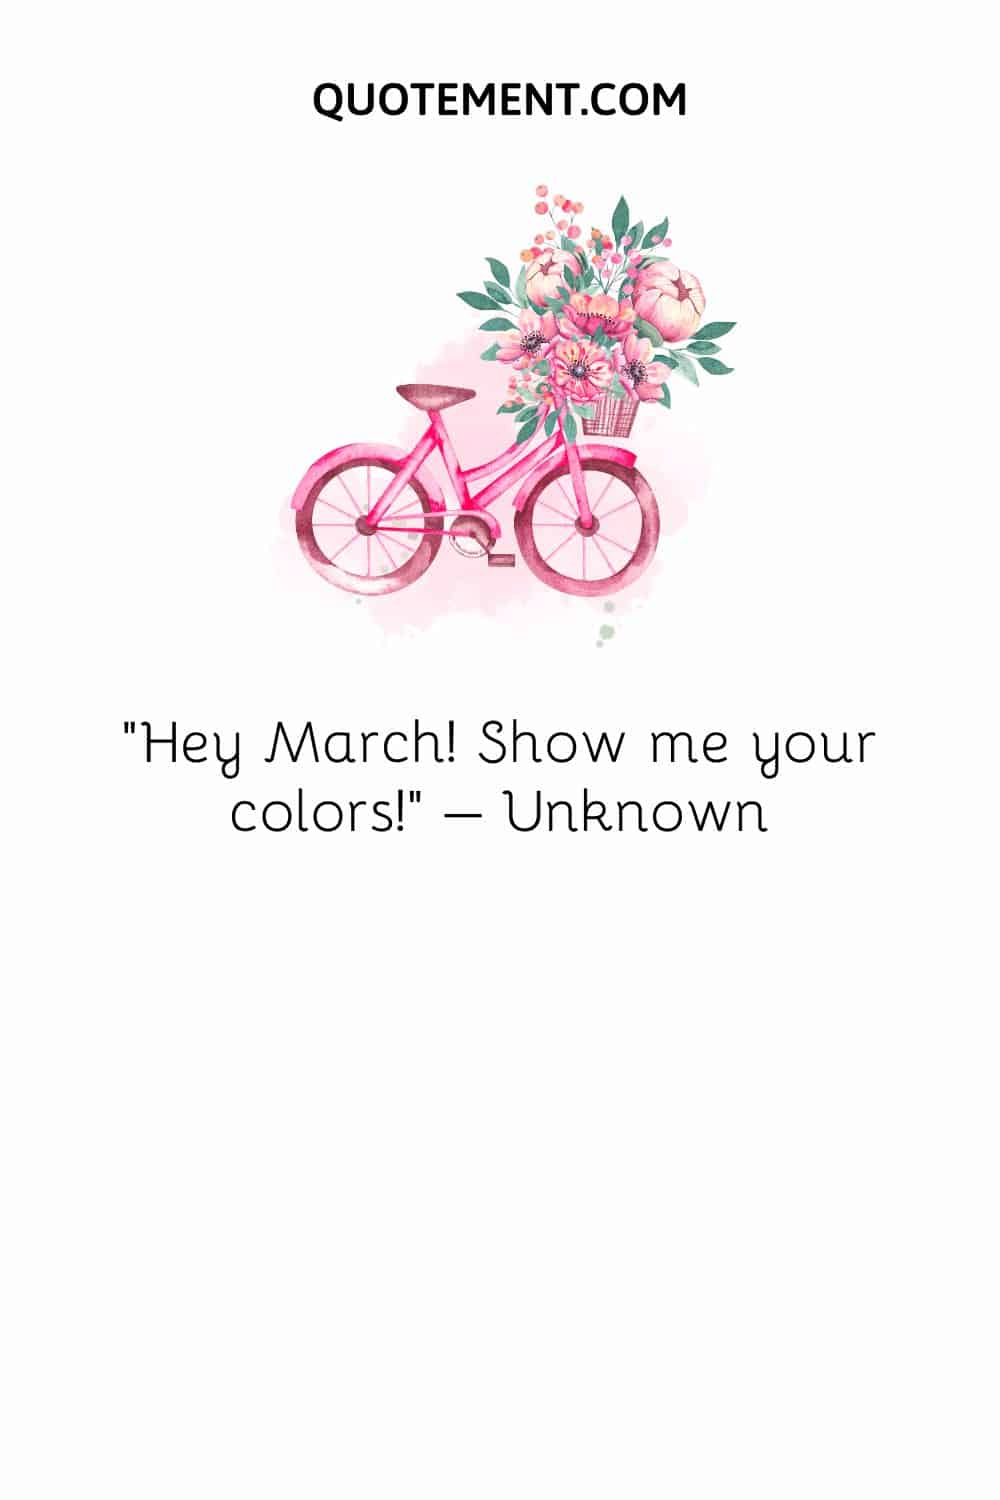 Hey March! Show me your colors! – Unknown